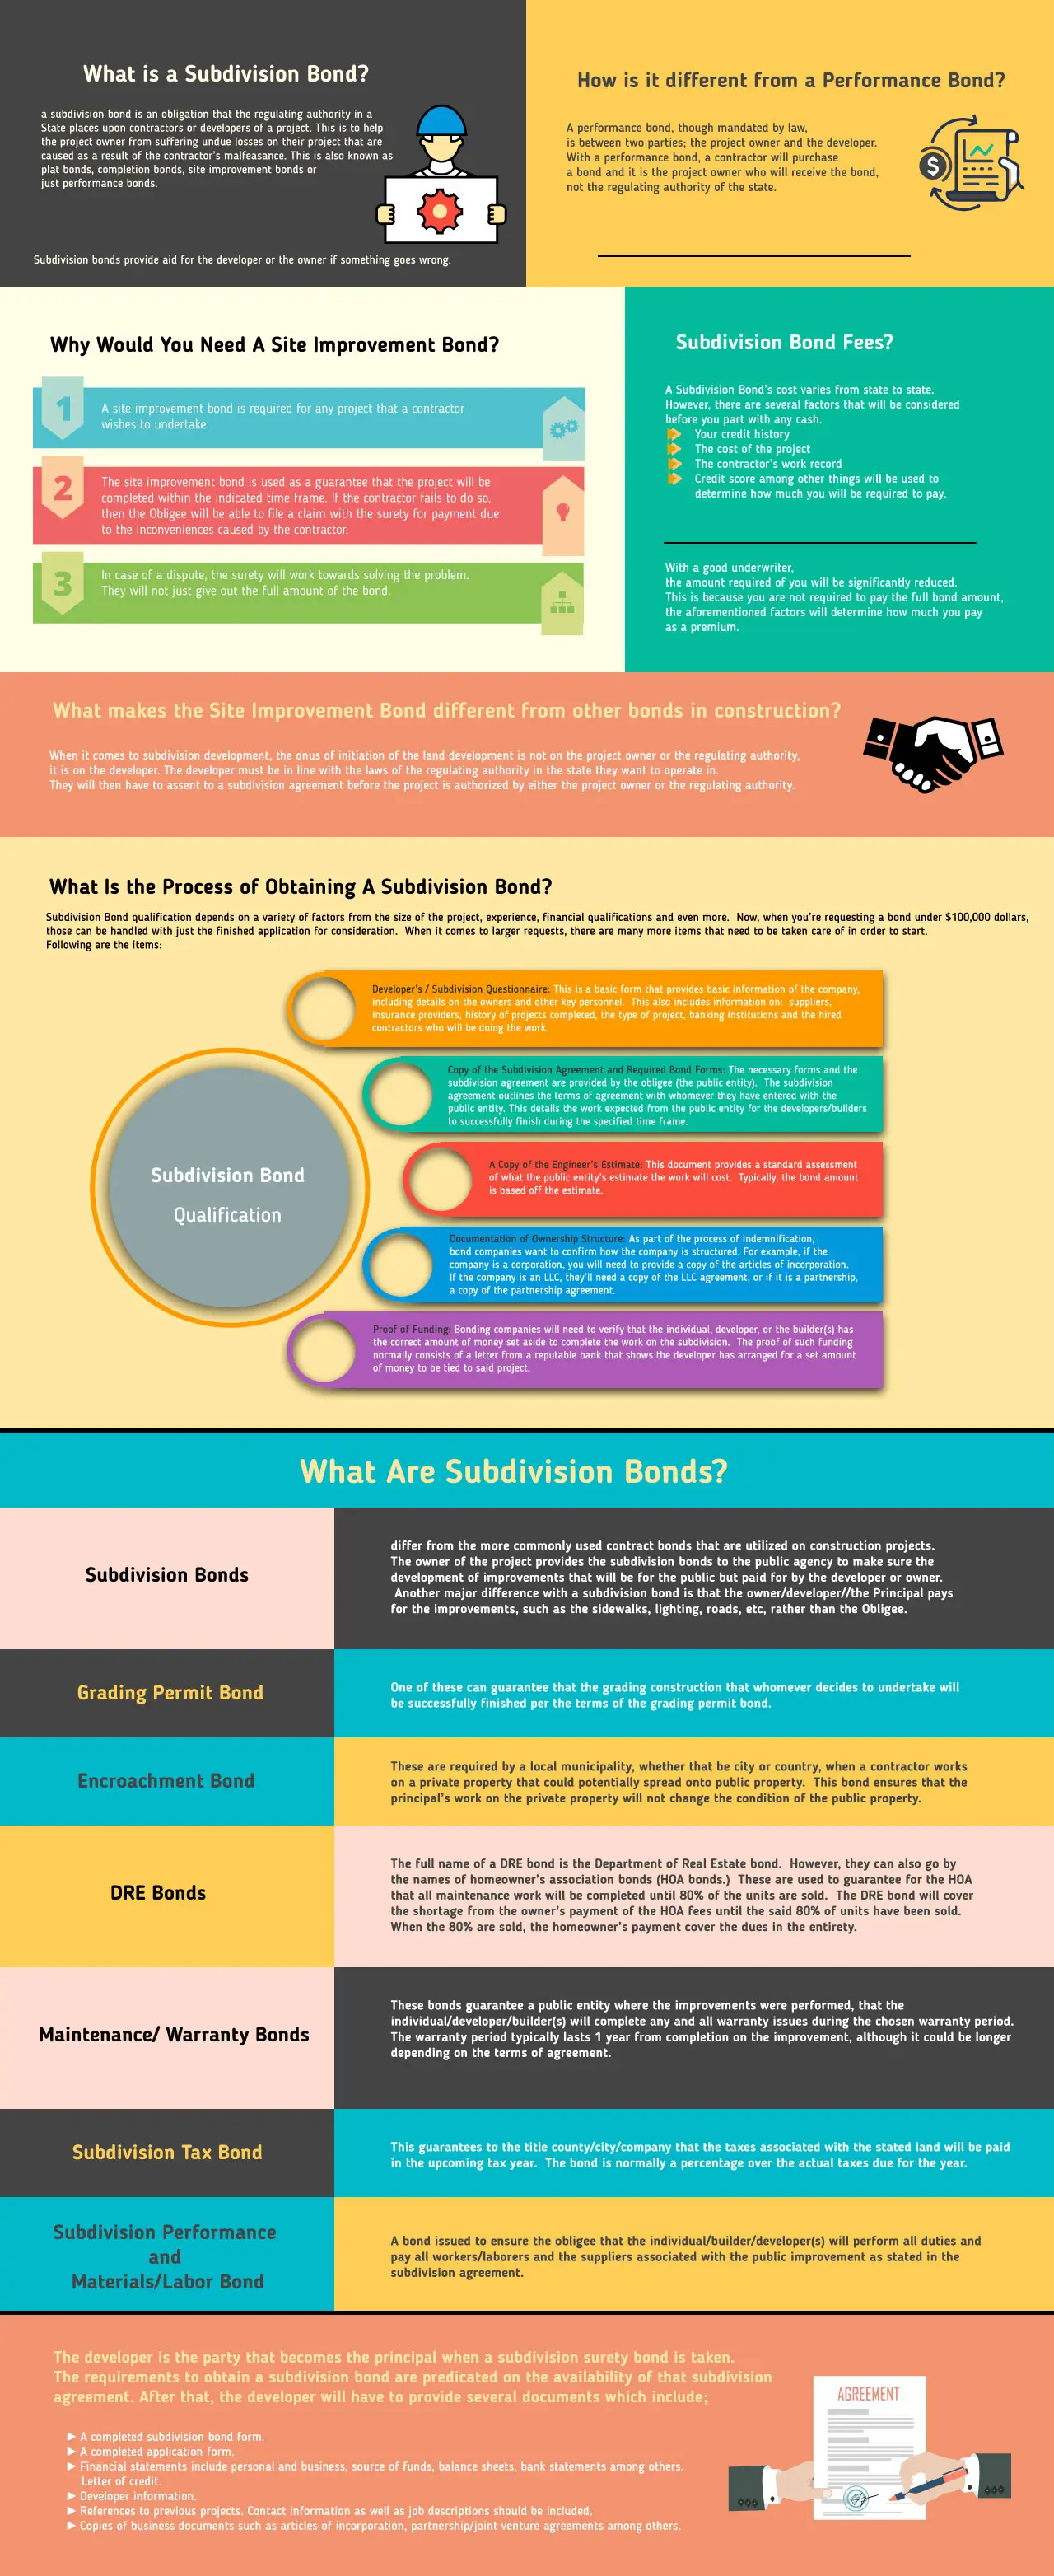 Subdivision Bonds - infographic on what is a subdivision bond and how it is different from a performance bond and why one needs a site improvement bond and the fees for a subdivision bond as well as the process for getting a site improvement bond - black and white text on multi colored background